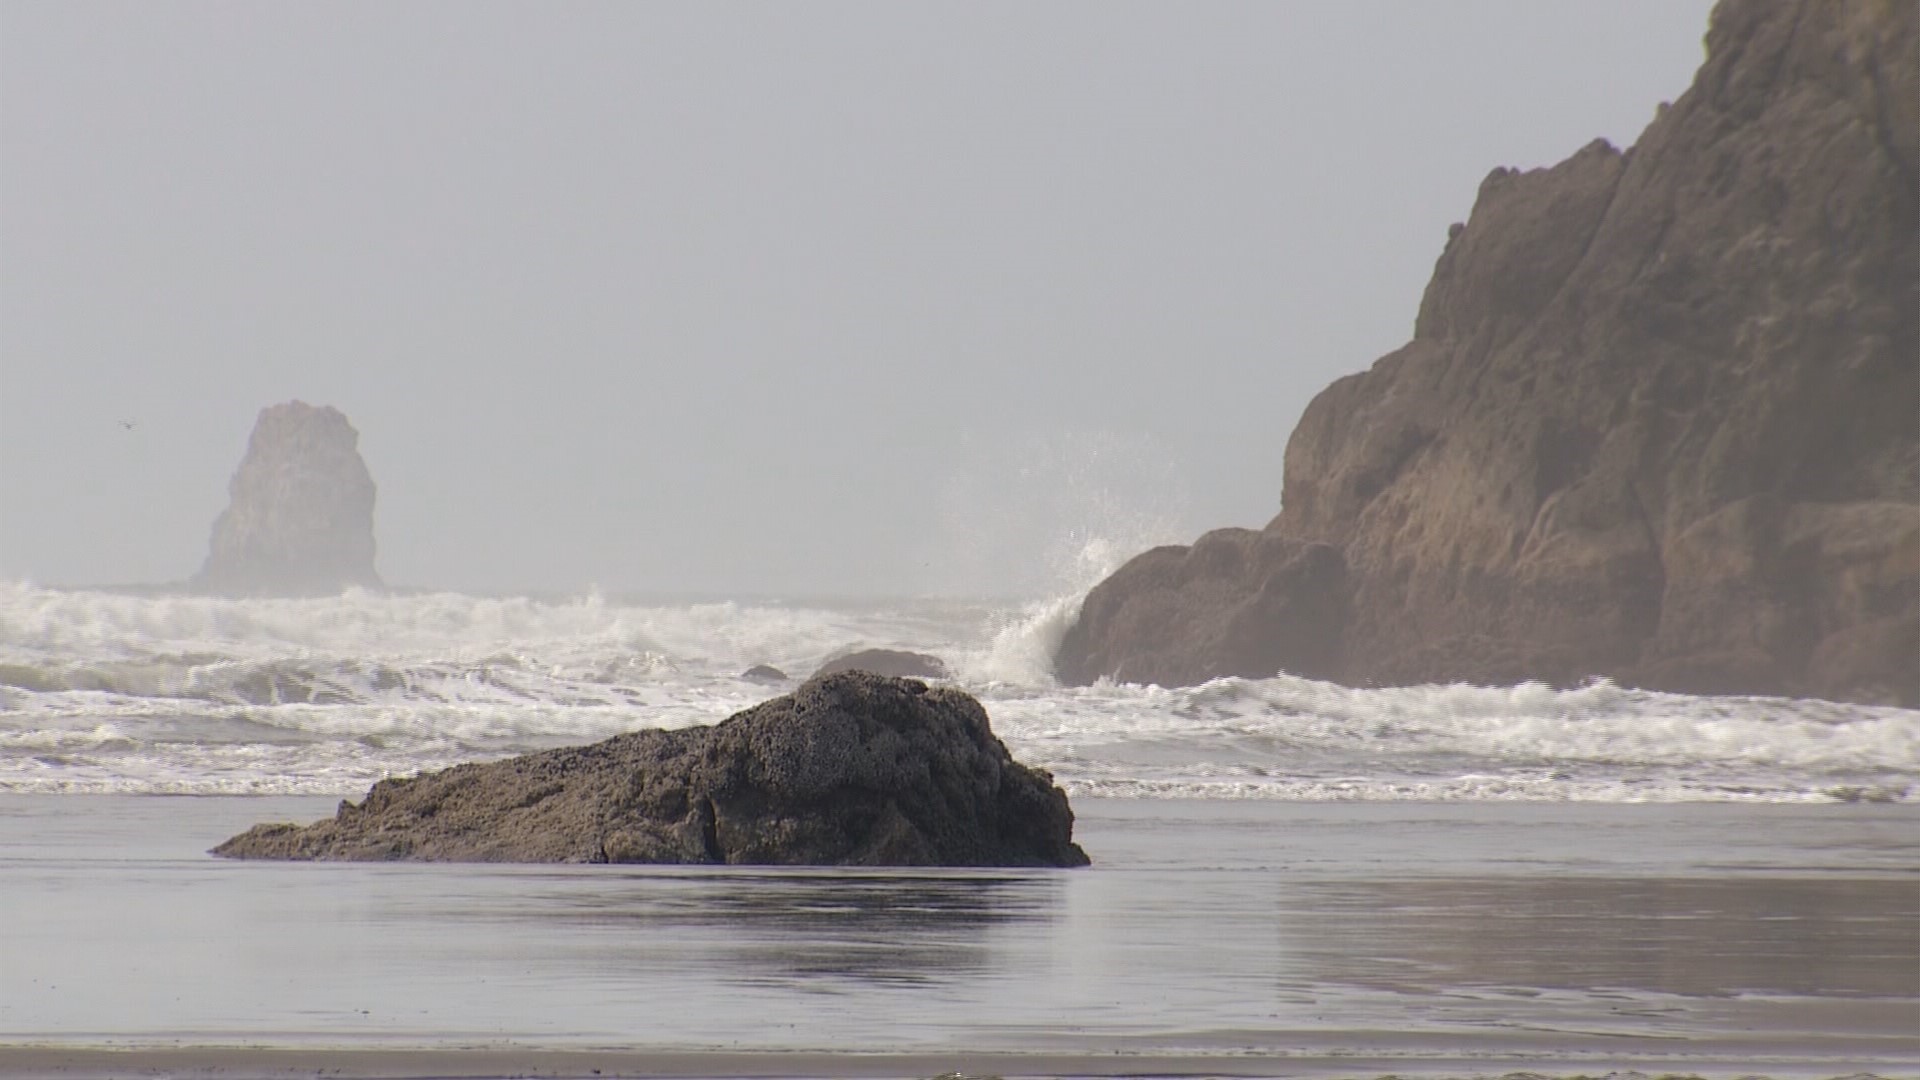 It's not the easiest beach to get to, but it is well worth the effort. #k5evening